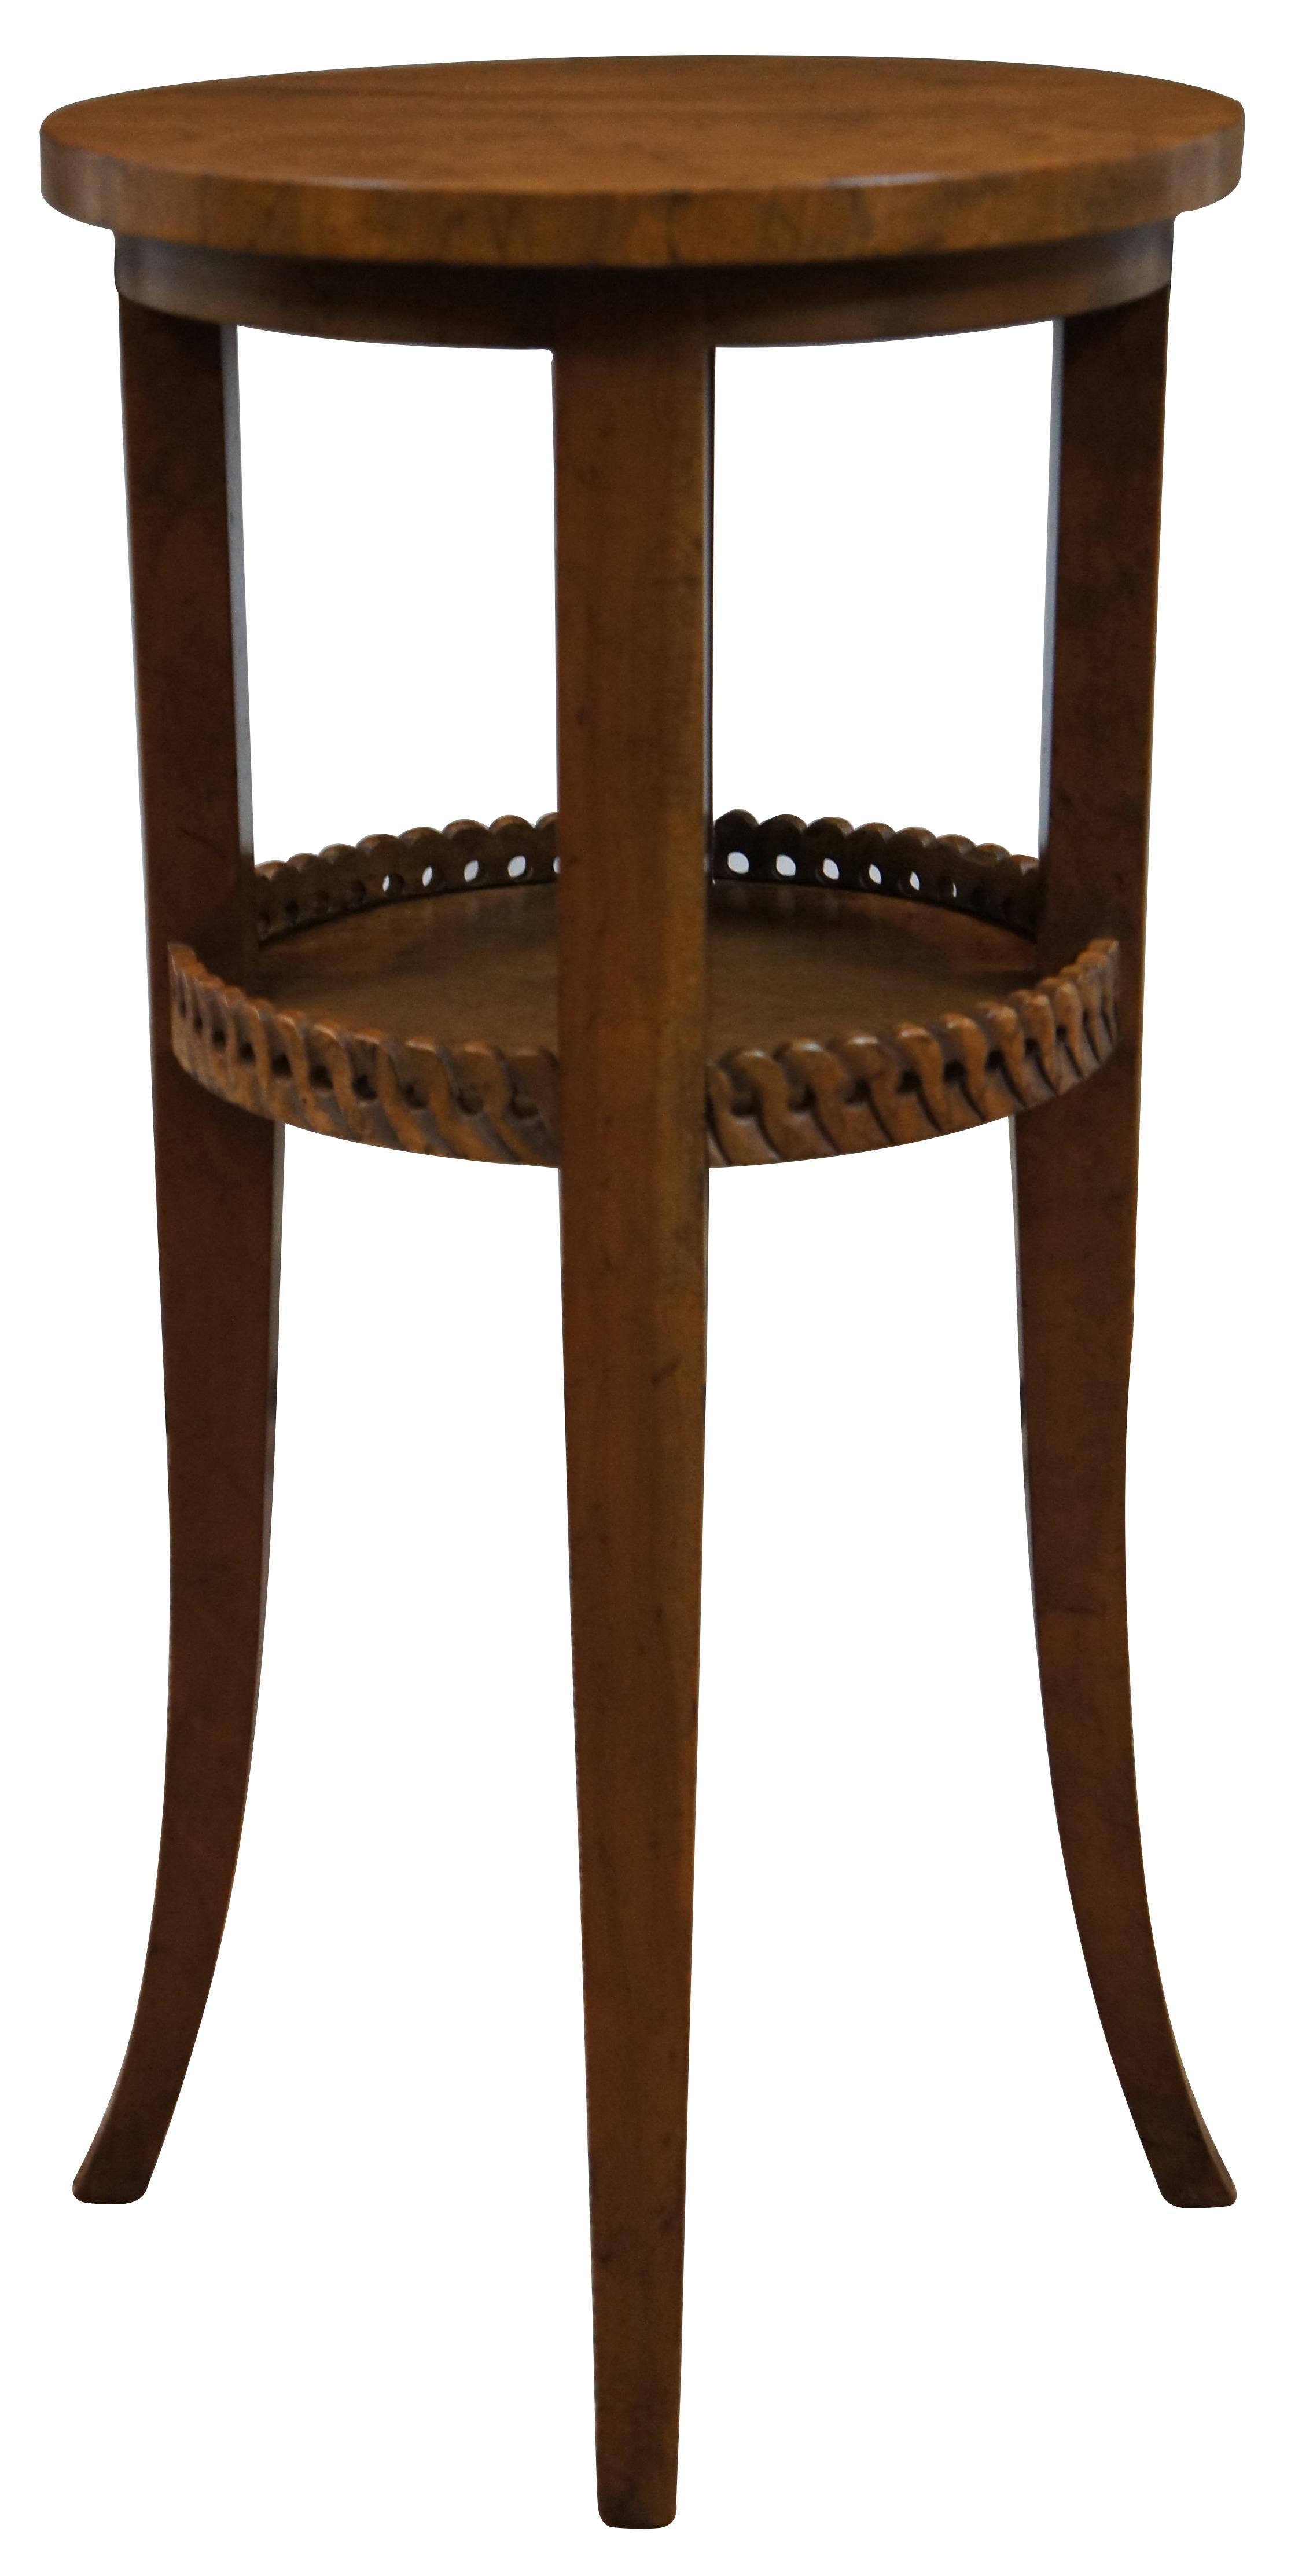 Rare Vintage Baker Furniture two tier accent table / plant stand with round top, sabre legs and a pierced rope twist gallery on the lower tier. Made from European Walnut. 

Style No: 3966 (Stand)
Literature : Page 88 of Baker's European and Far